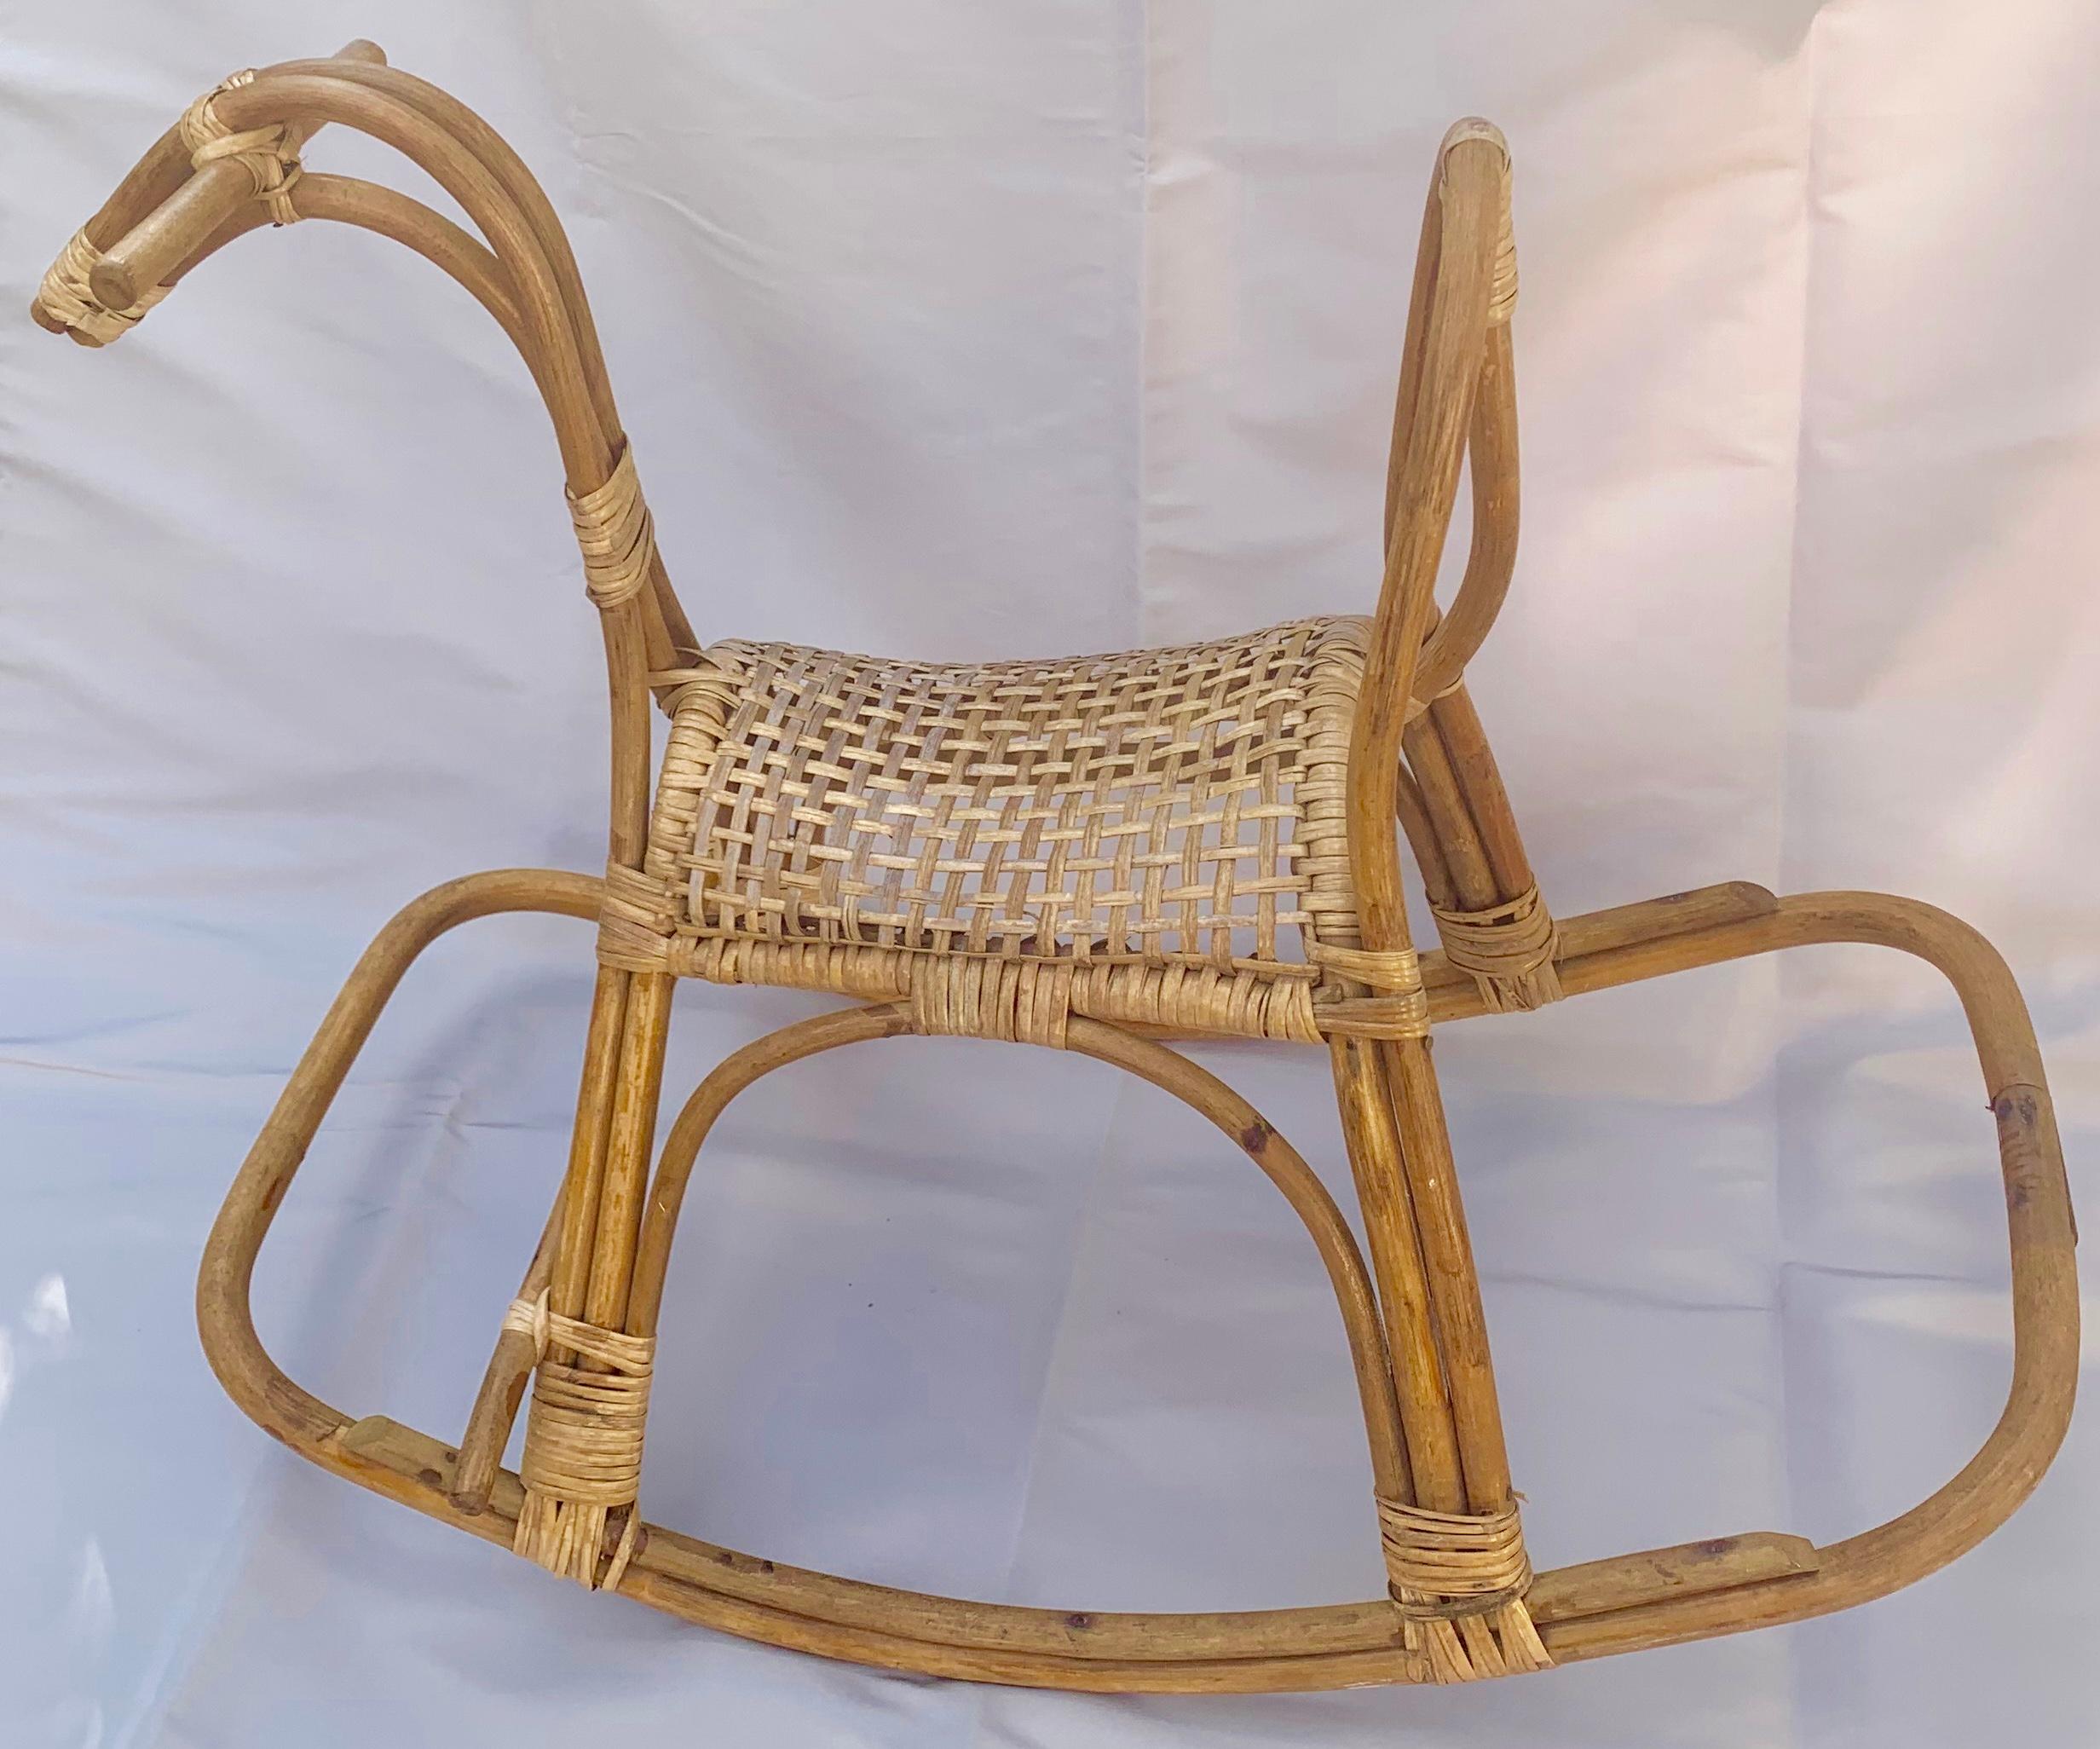 Franco Albini midcentury rocking horse sculpture. Midcentury rattan and wicker rocking horse sculpture, Italy, circa 1960.
Dimensions: H 24 in. x W 30 in. x D 18 in.